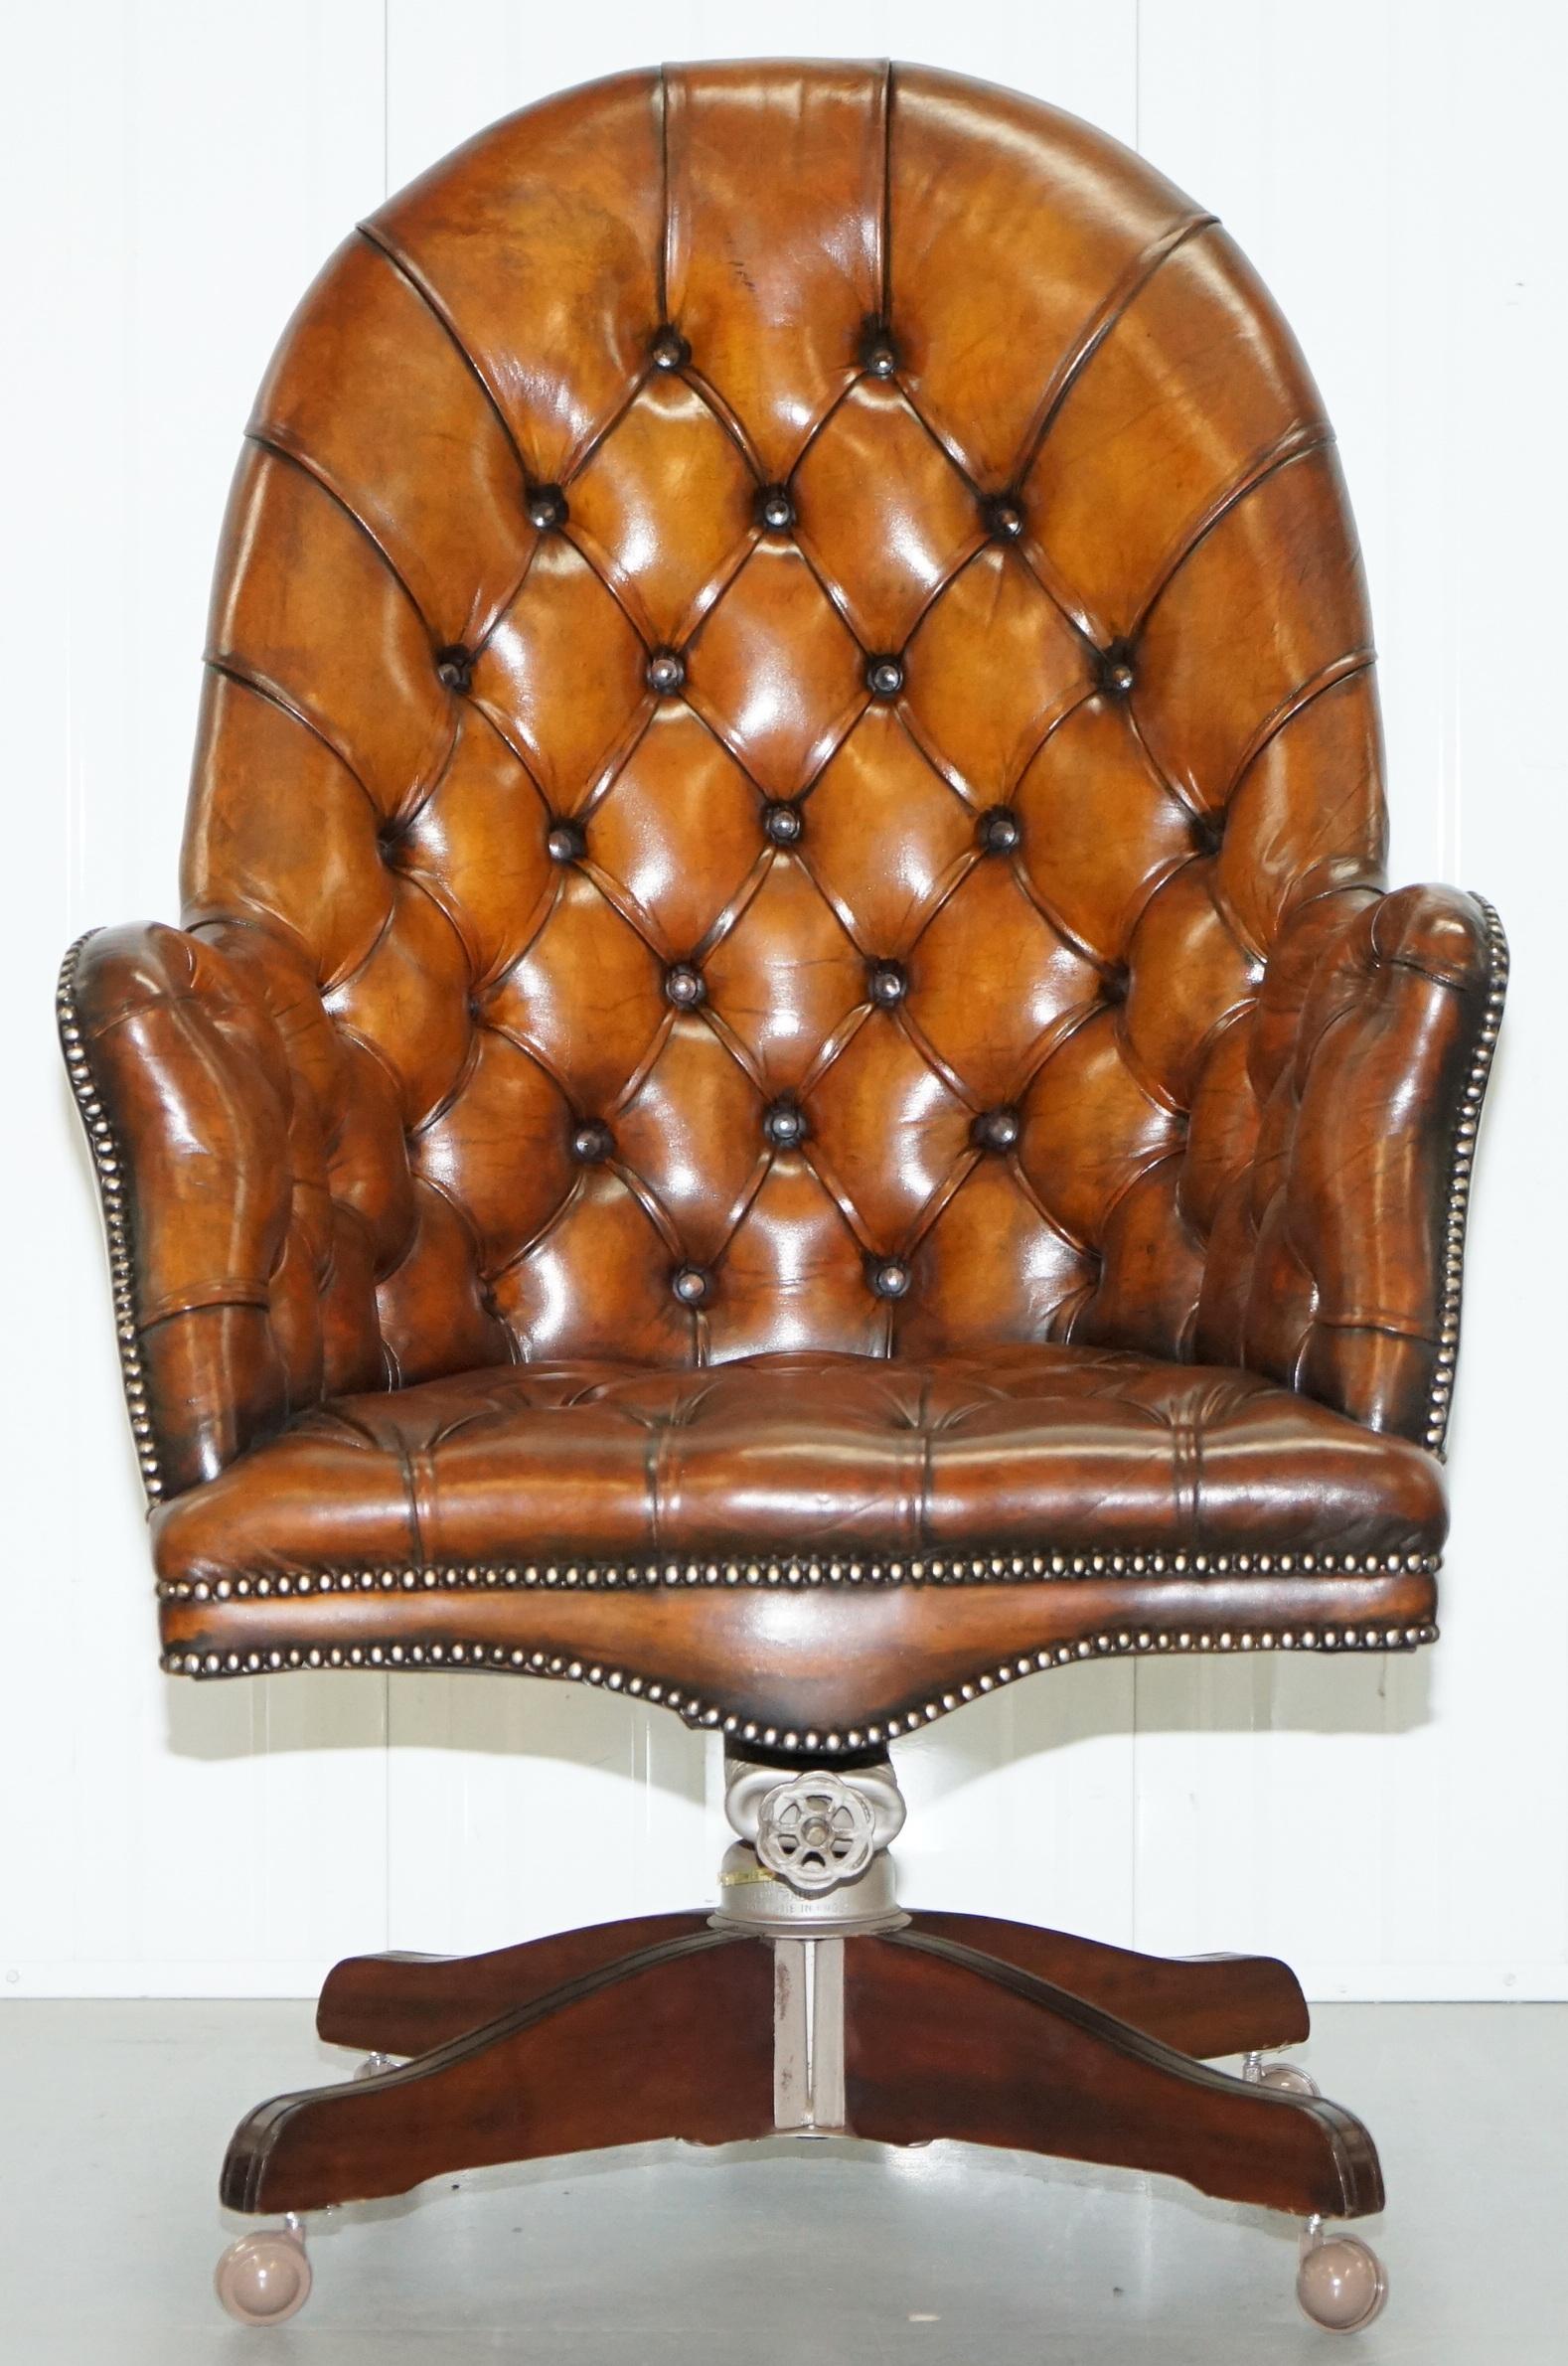 We are delighted to offer for sale this lovely fully restored circa 1900 horsehair padded with coil sprung base Chesterfield Porters fully buttoned captains chair with original double spring Hillcrest base

The chair is the birthplace of